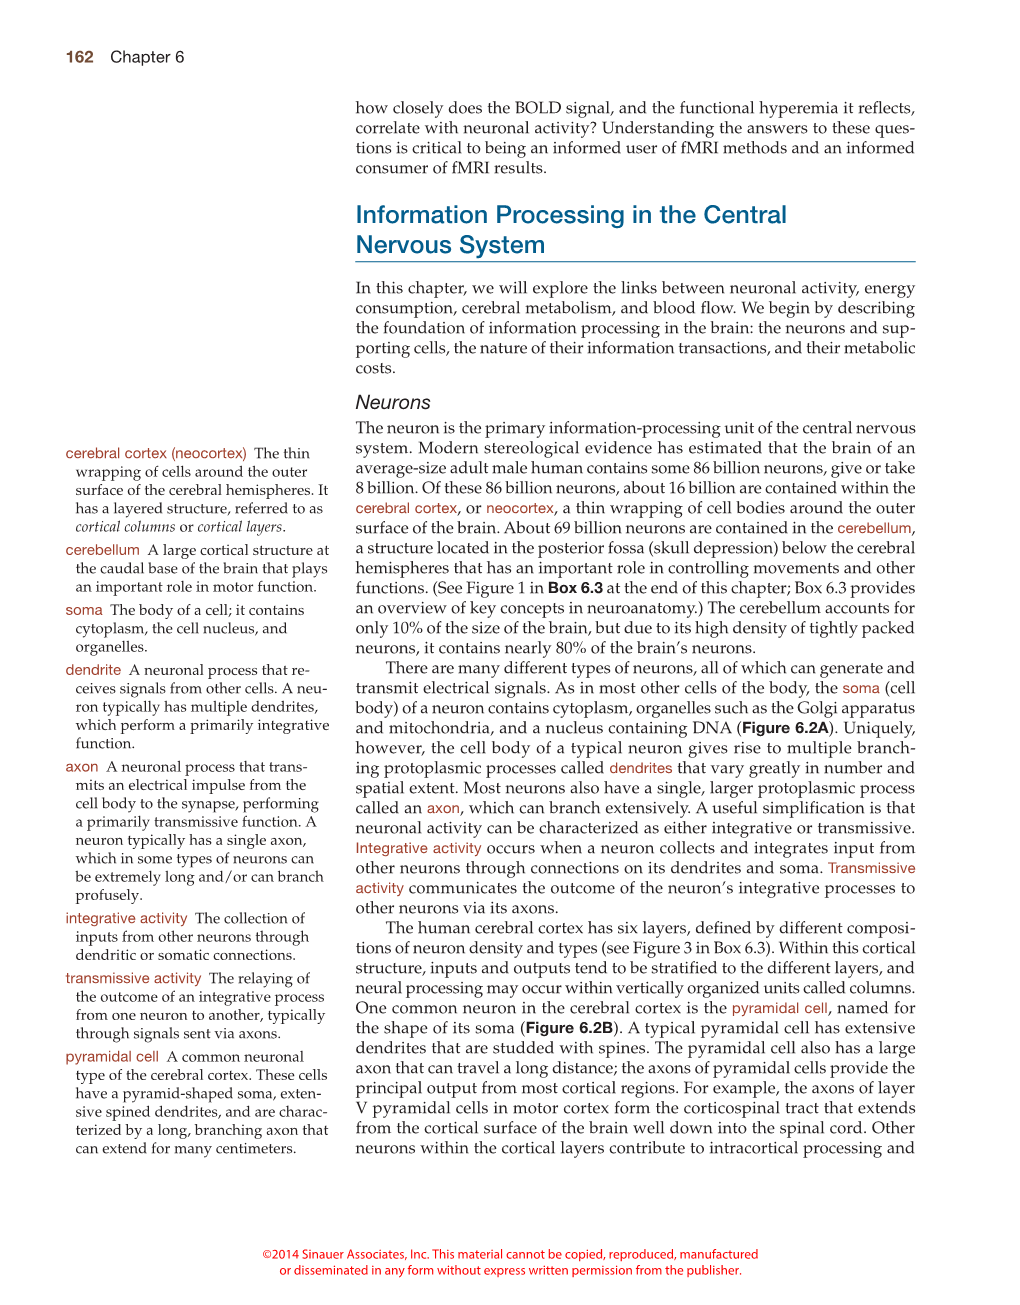 Information Processing in the Central Nervous System